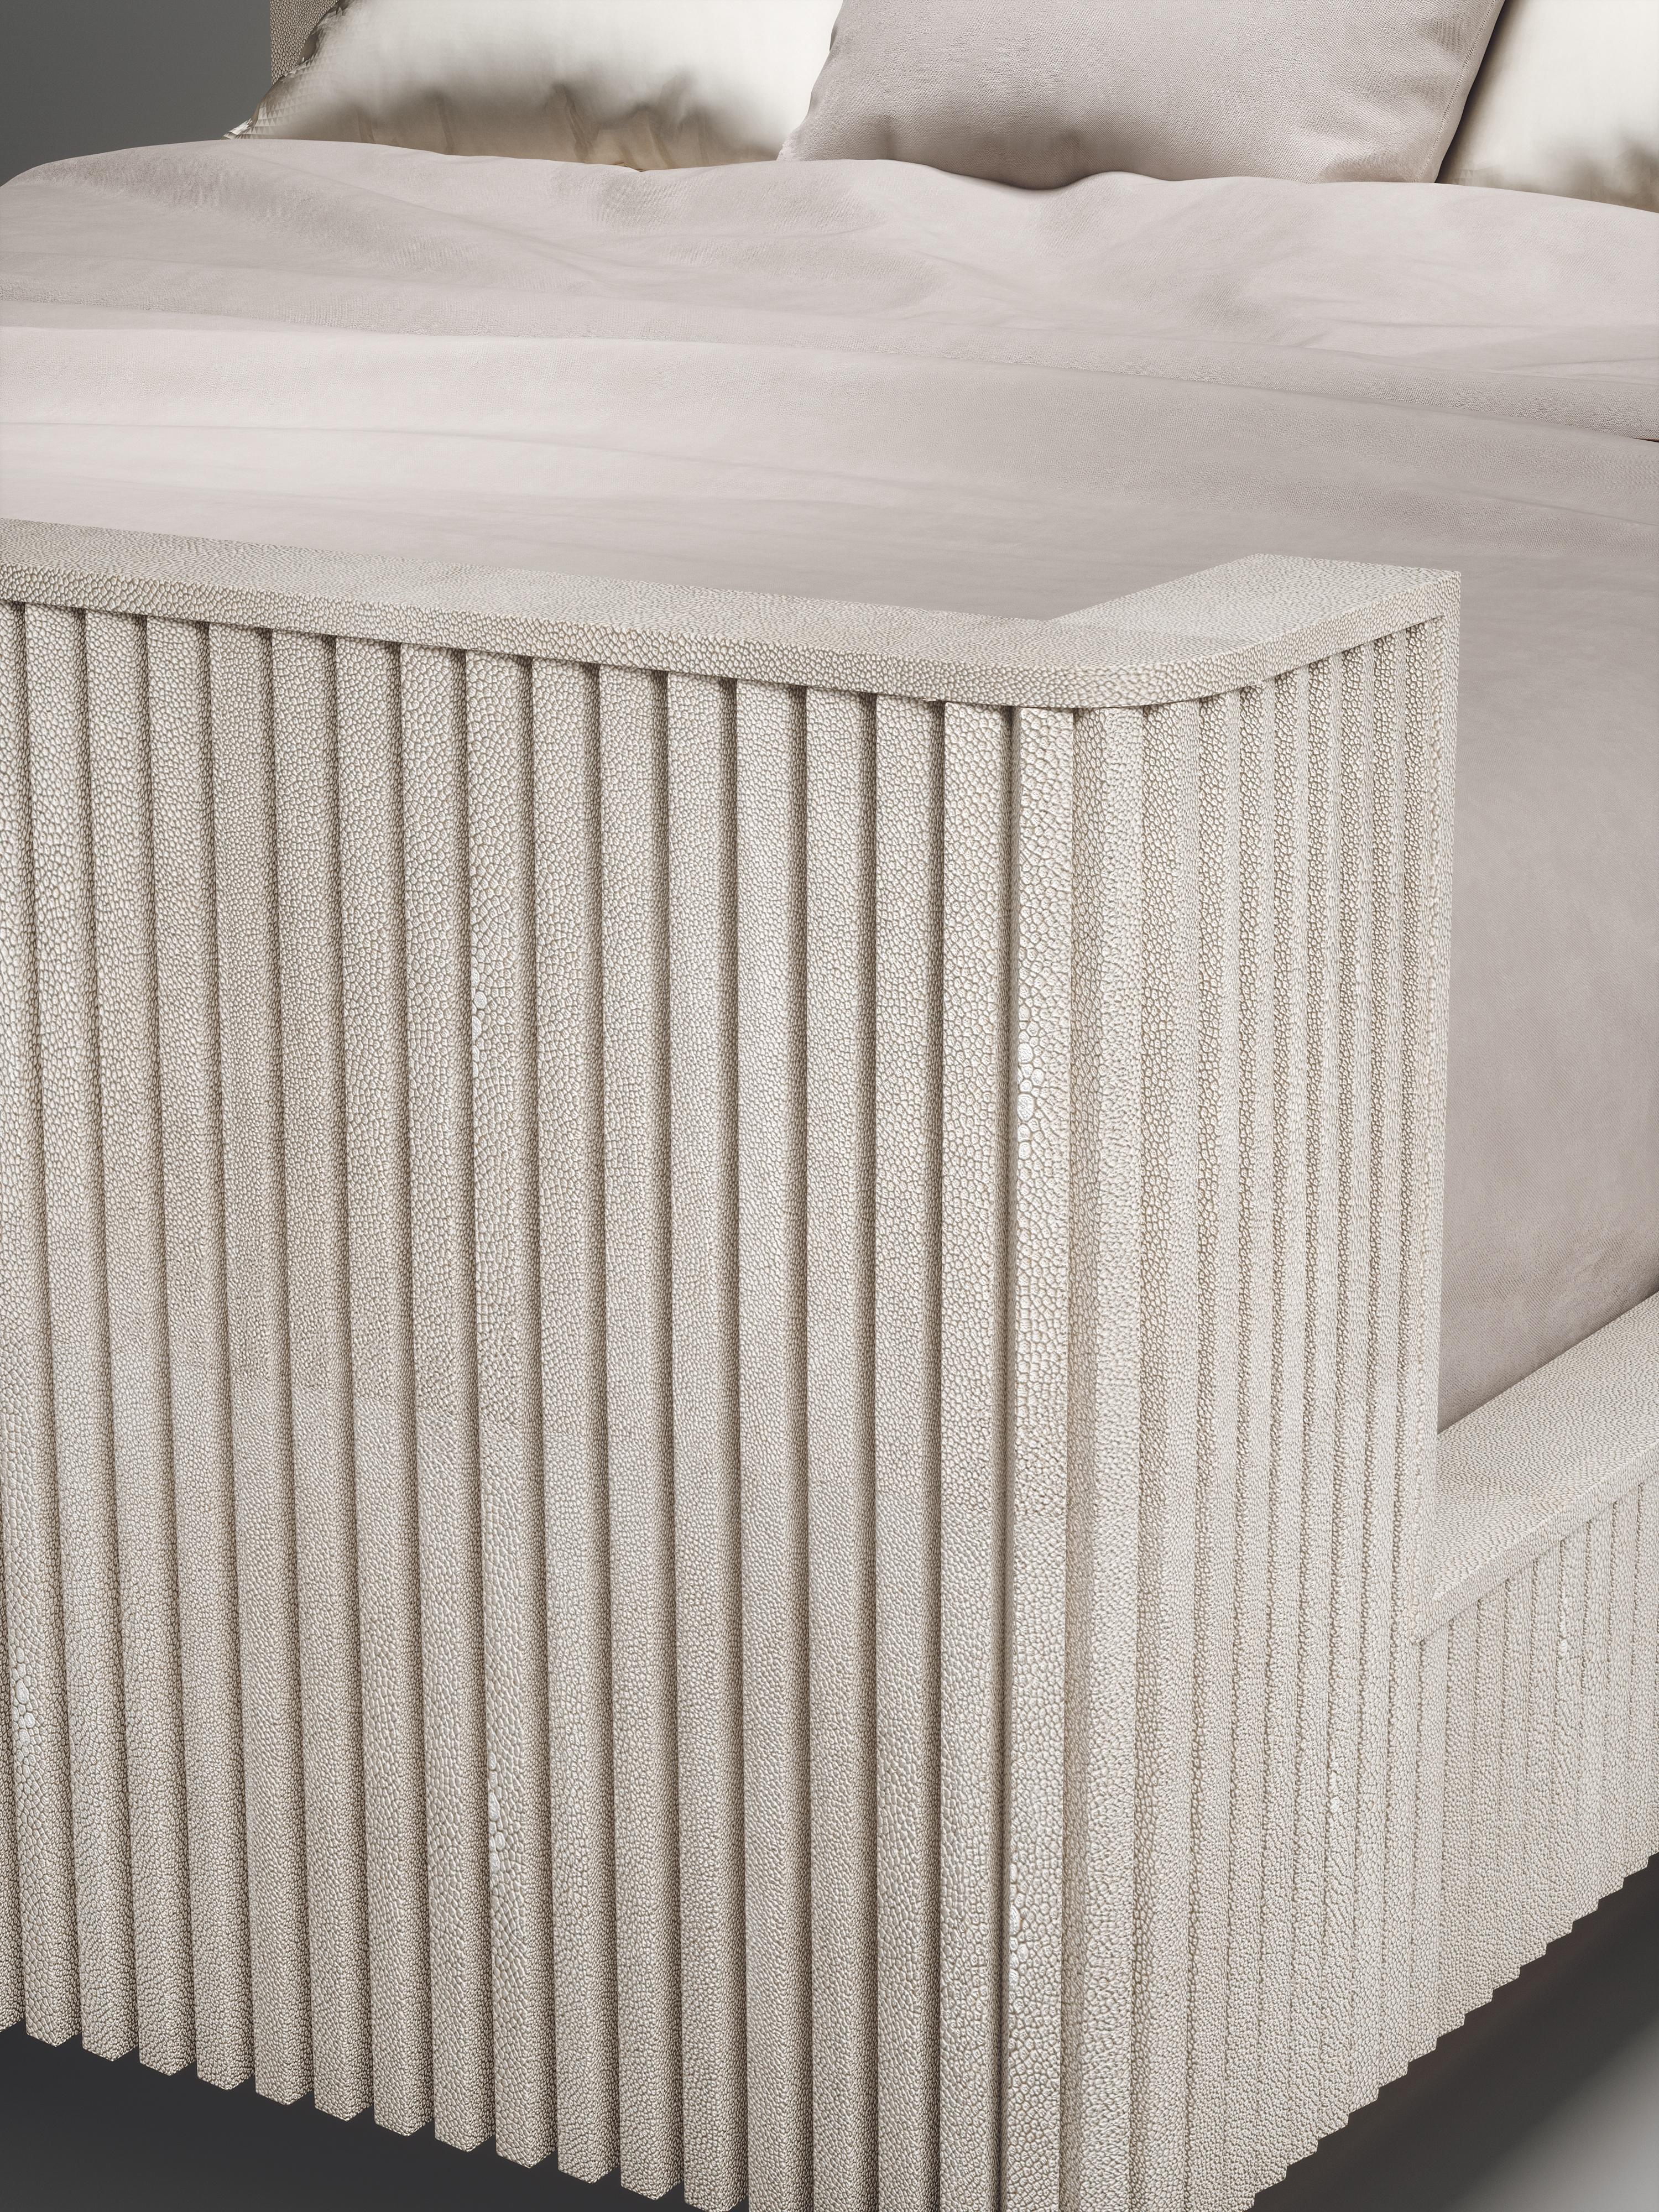 The Fluted Bed in Cream Shagreen by R&Y Augousti is a one of a kind piece. This modern and elegant design creates a subtle art deco statement for any bedroom. The inlay and artisanal hand-work of shagreen on this piece shows the incredible work